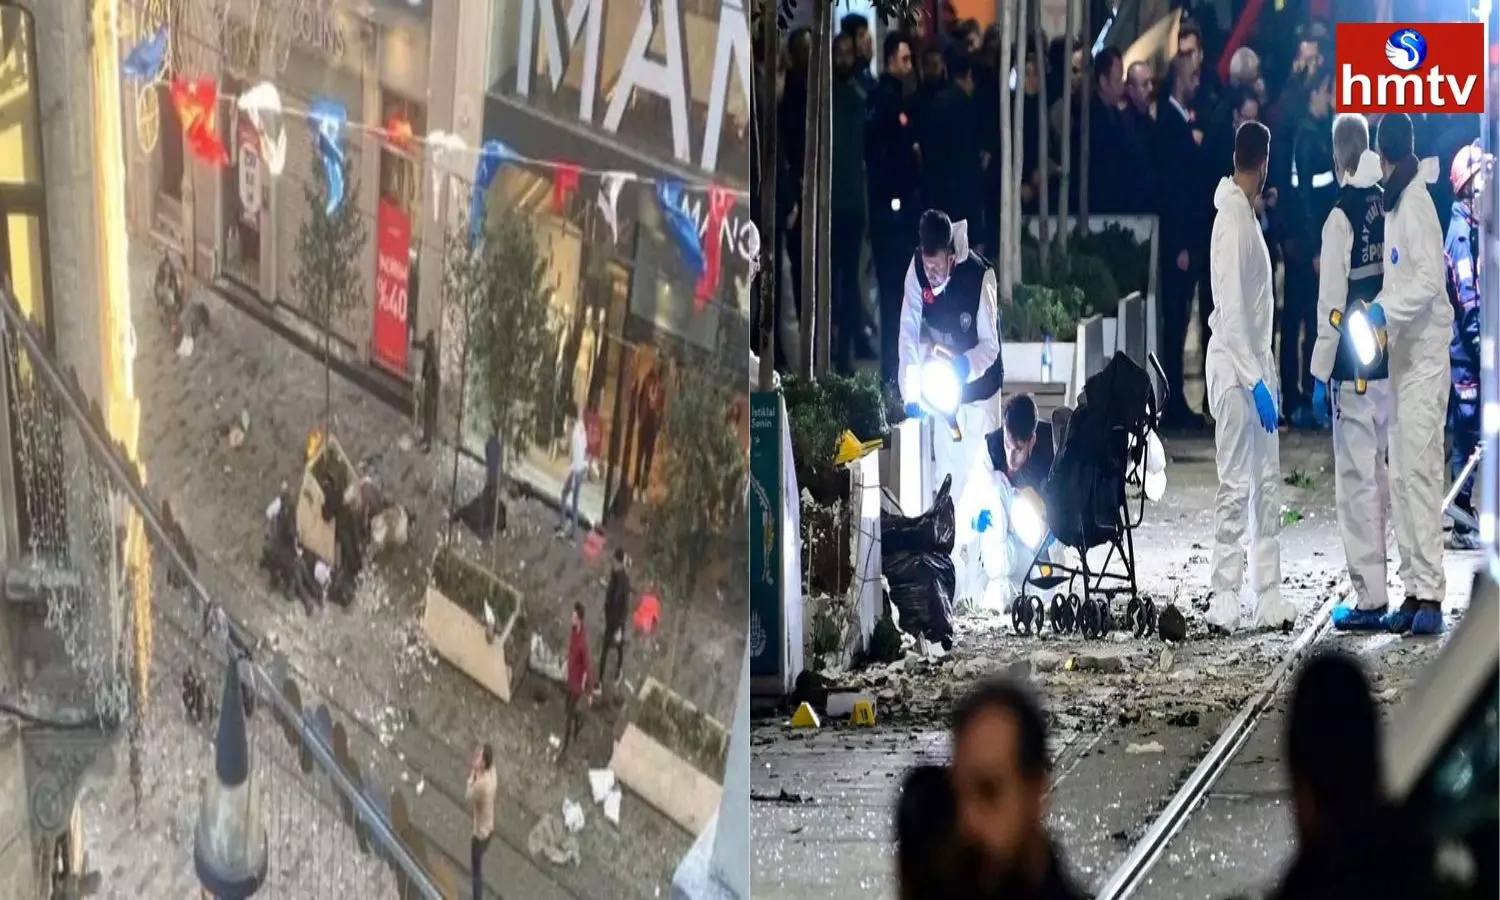 huge explosion occurred at a market in istanbul, turkey